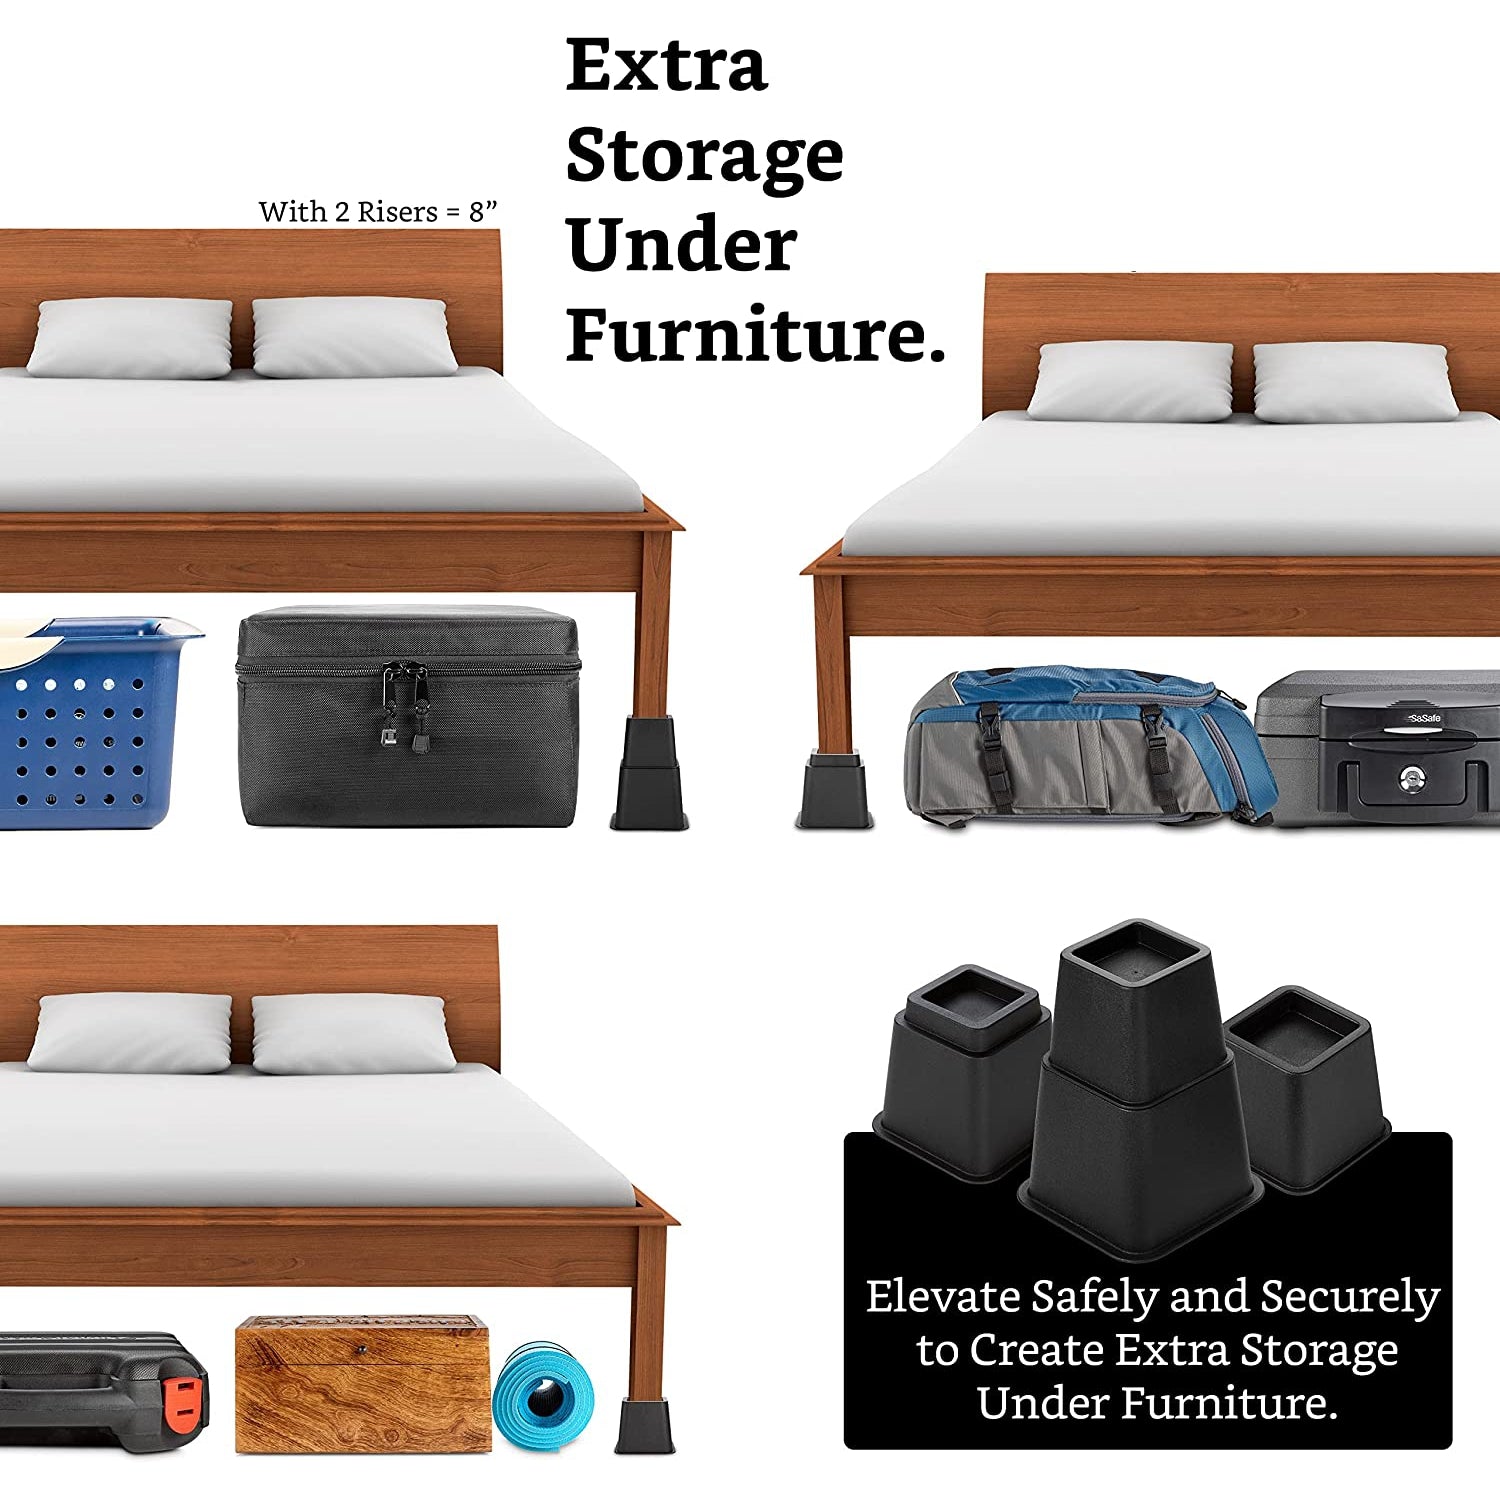 HOLDN’ STORAGE Bed Risers, Furniture Risers - Heavy Duty